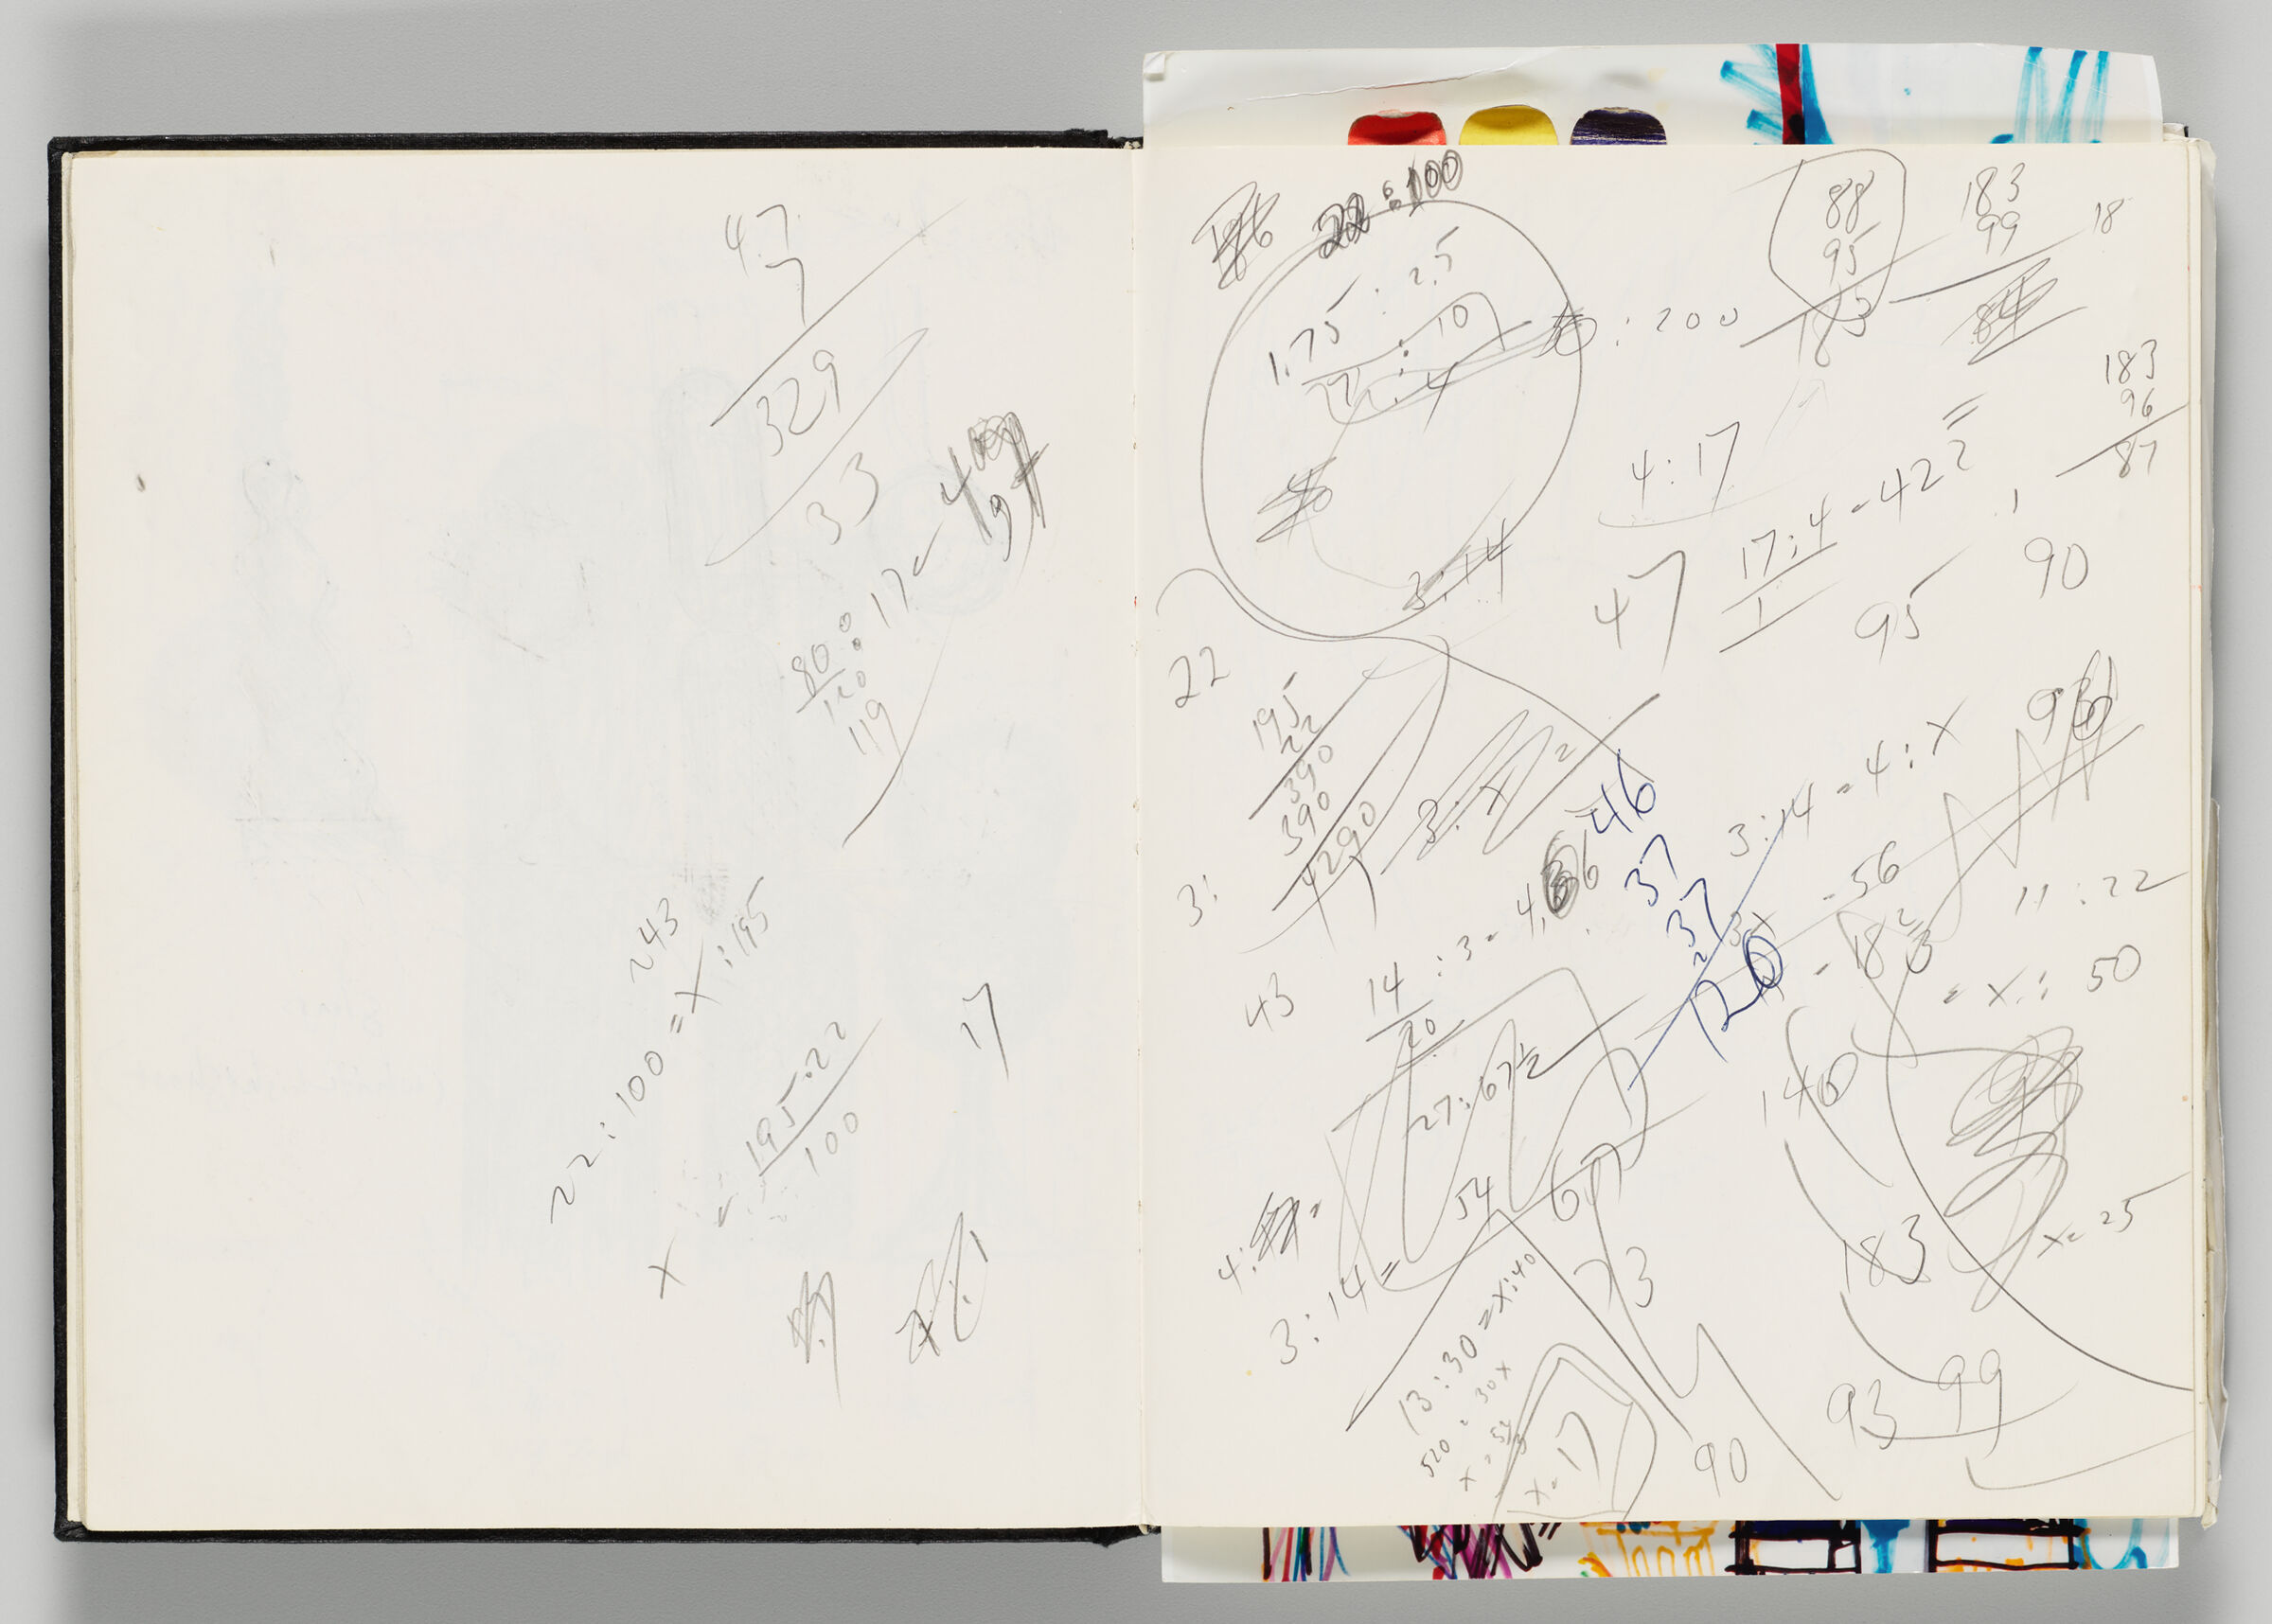 Untitled (Calculations, Left Page); Untitled (Calculations, Right Page)